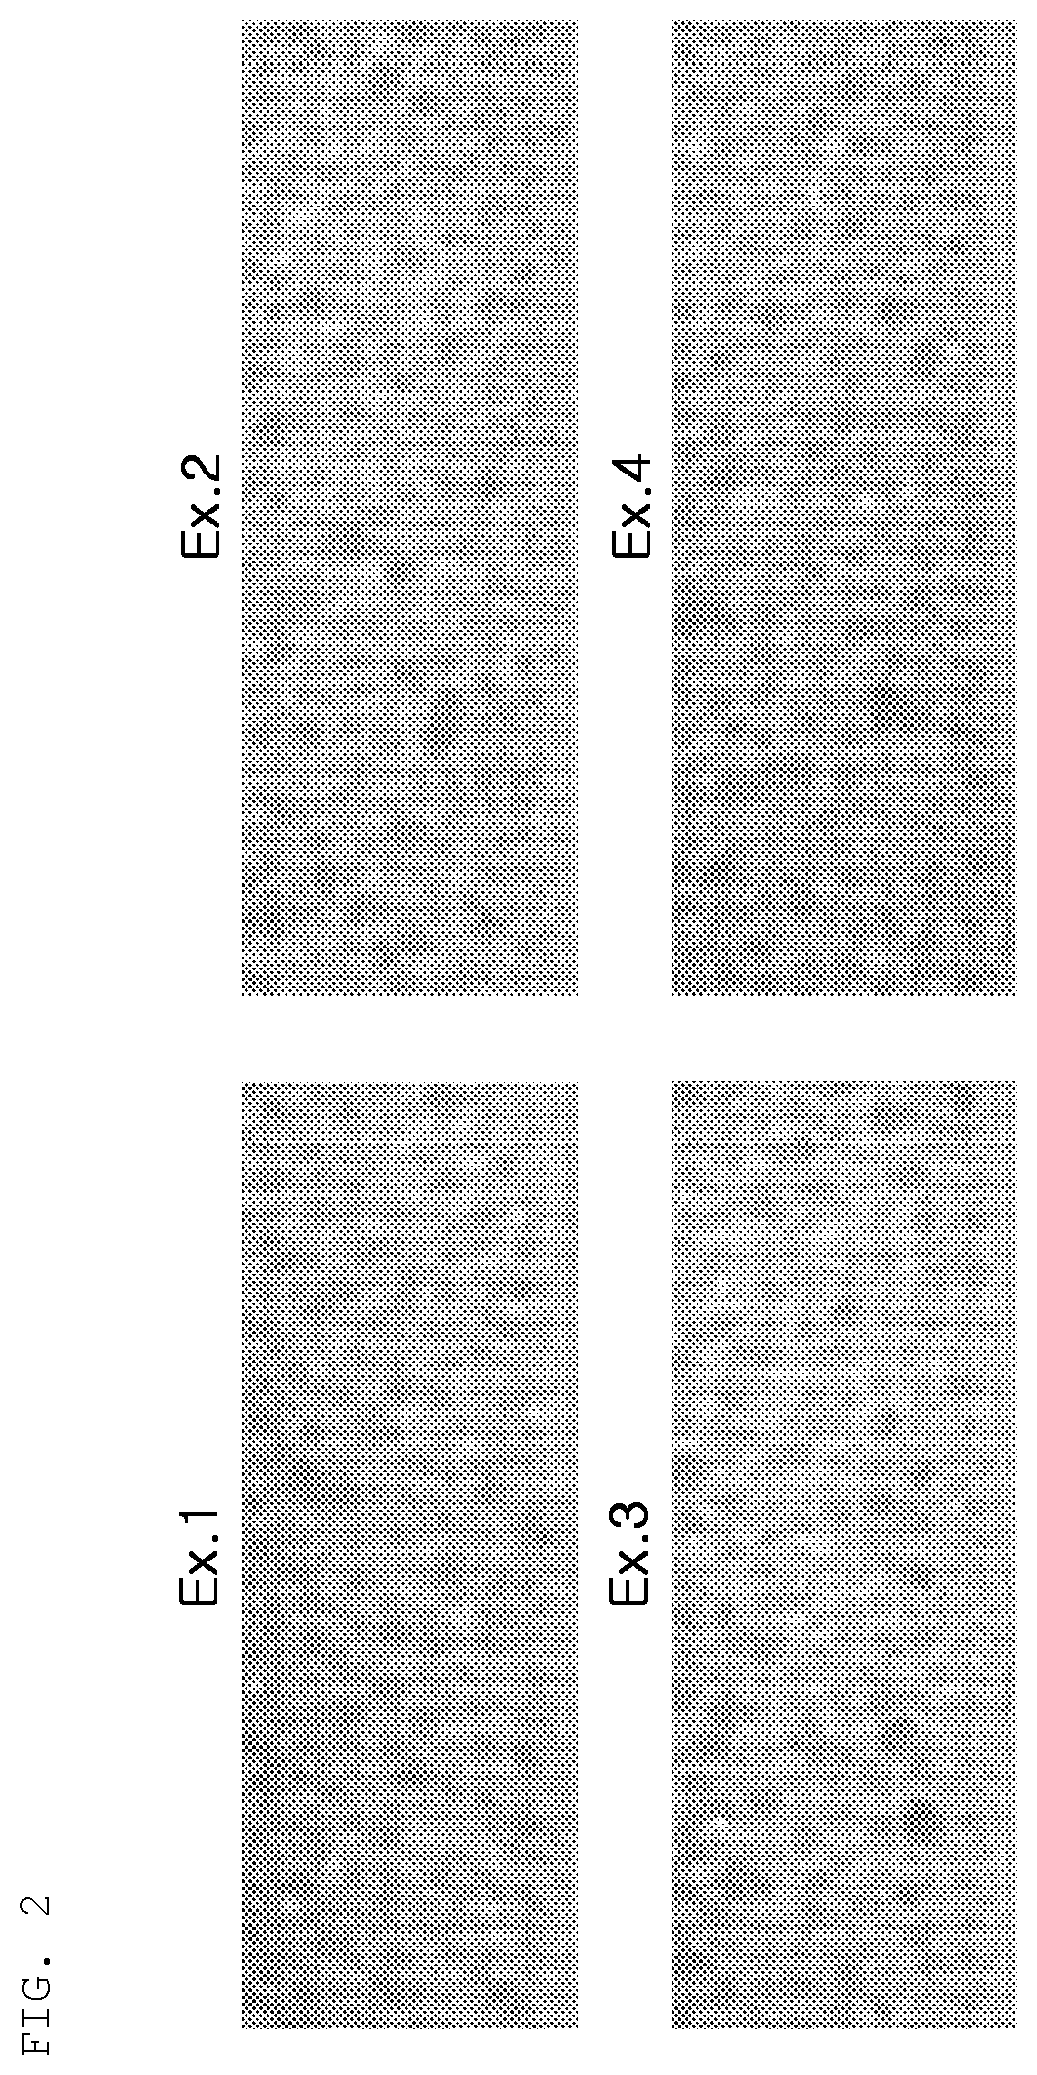 Composition for preparing vinyl chloride-based polymer and method for preparing vinyl chloride-based polymer using the same